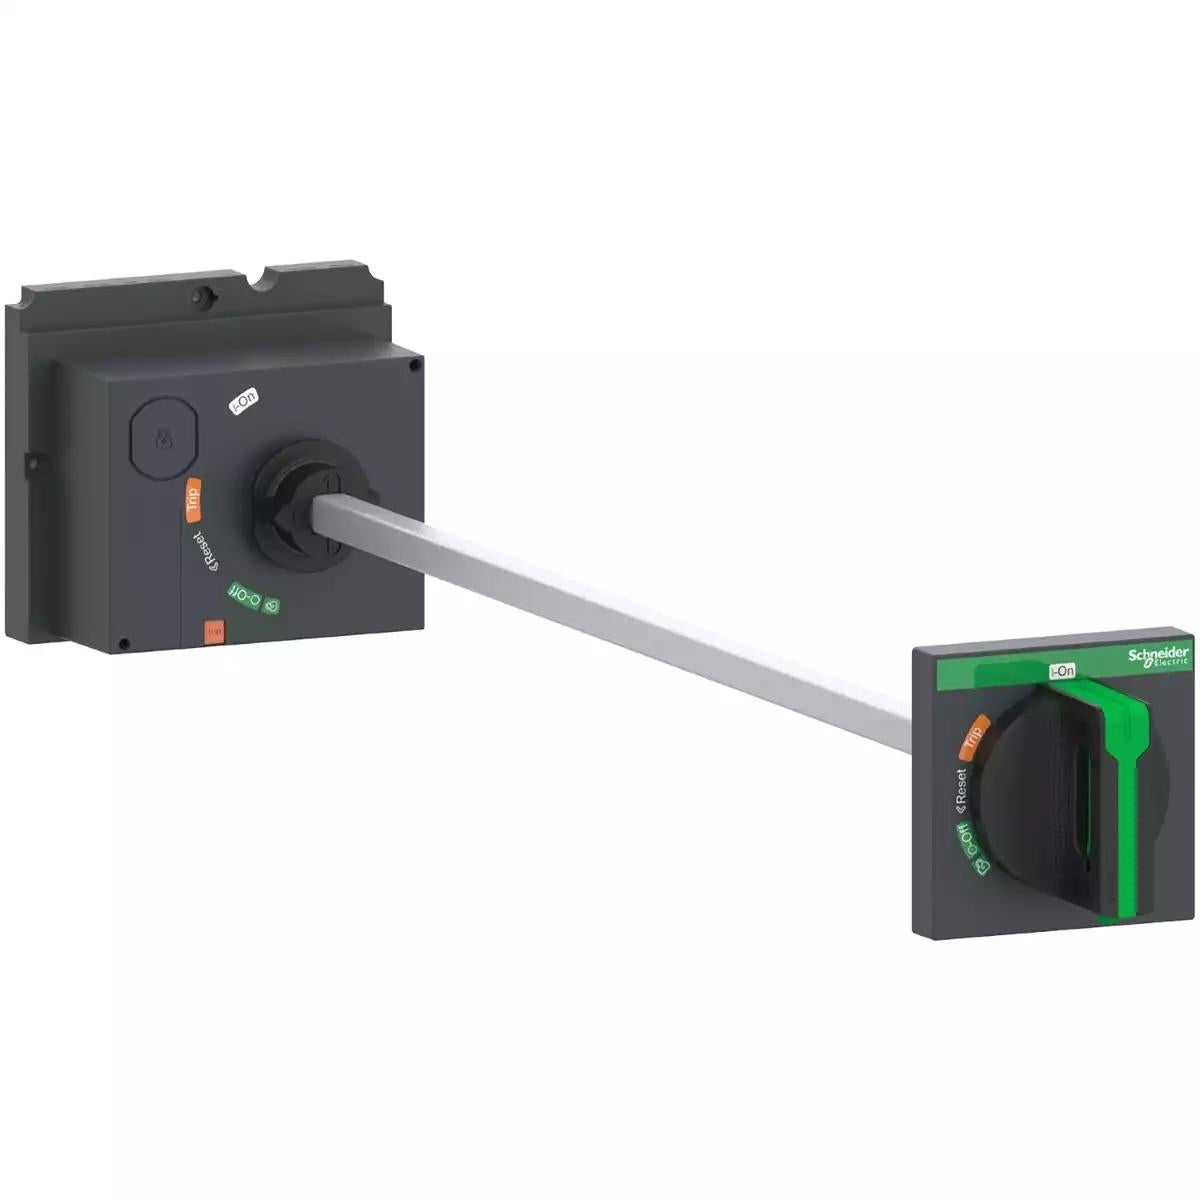 Schneider Electric extended rotary handle, ComPacT NSX 100/160/250, black handle, telescopic shaft 248 to 600 mm for withdrawable device, IP55